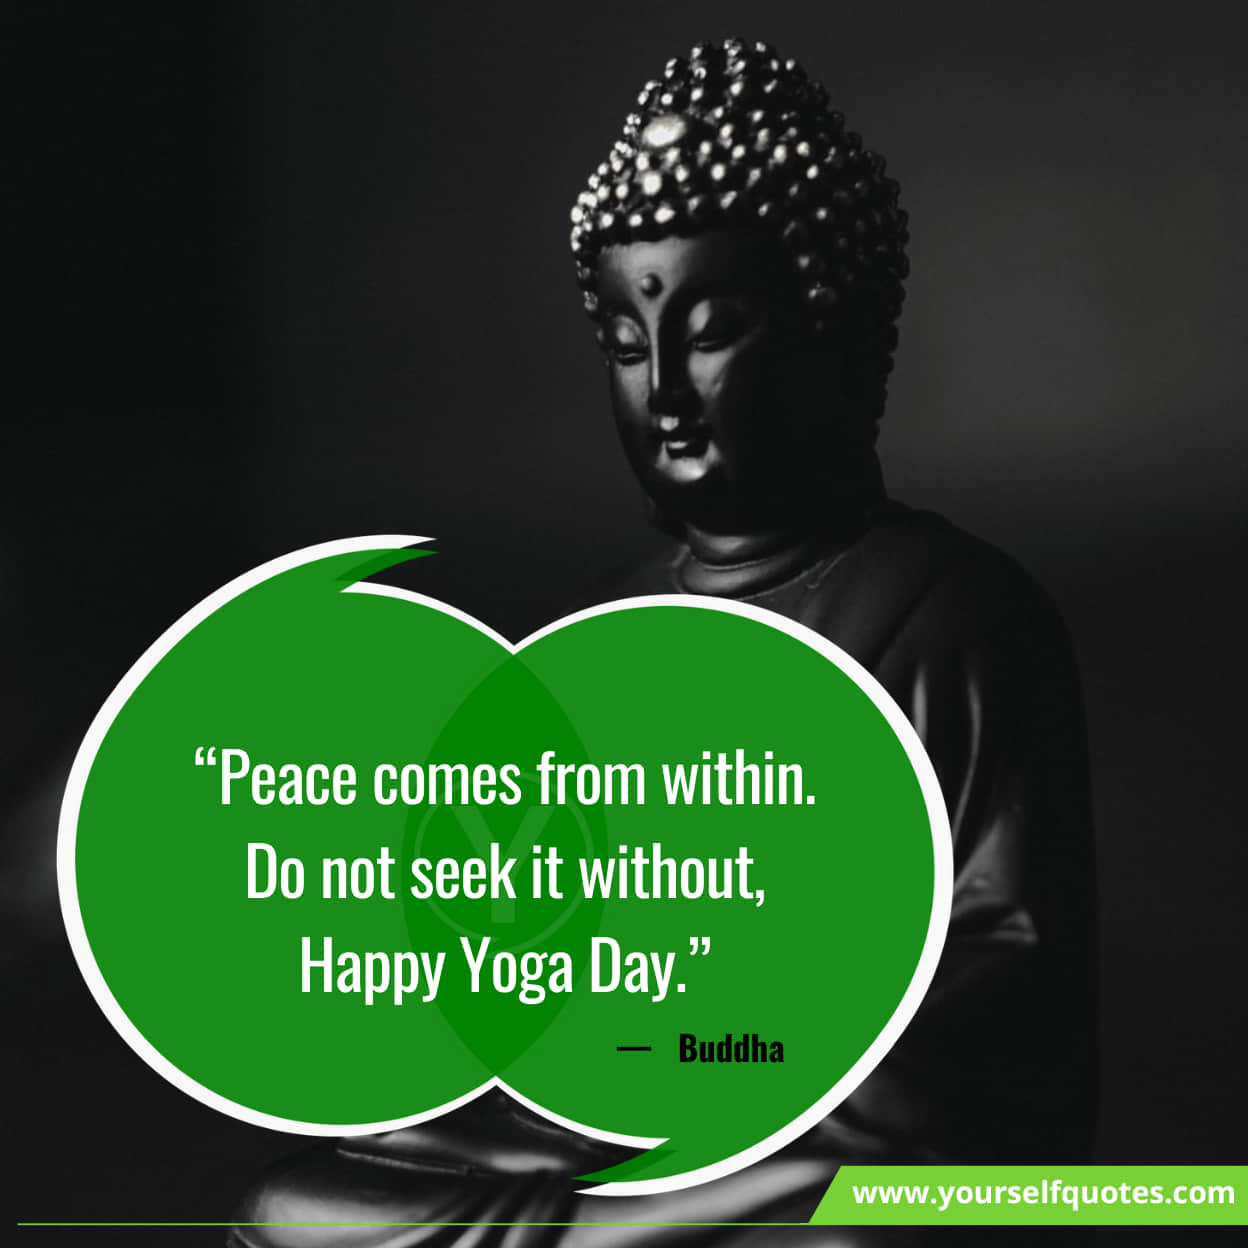 Yoga Day Quotes About Peace